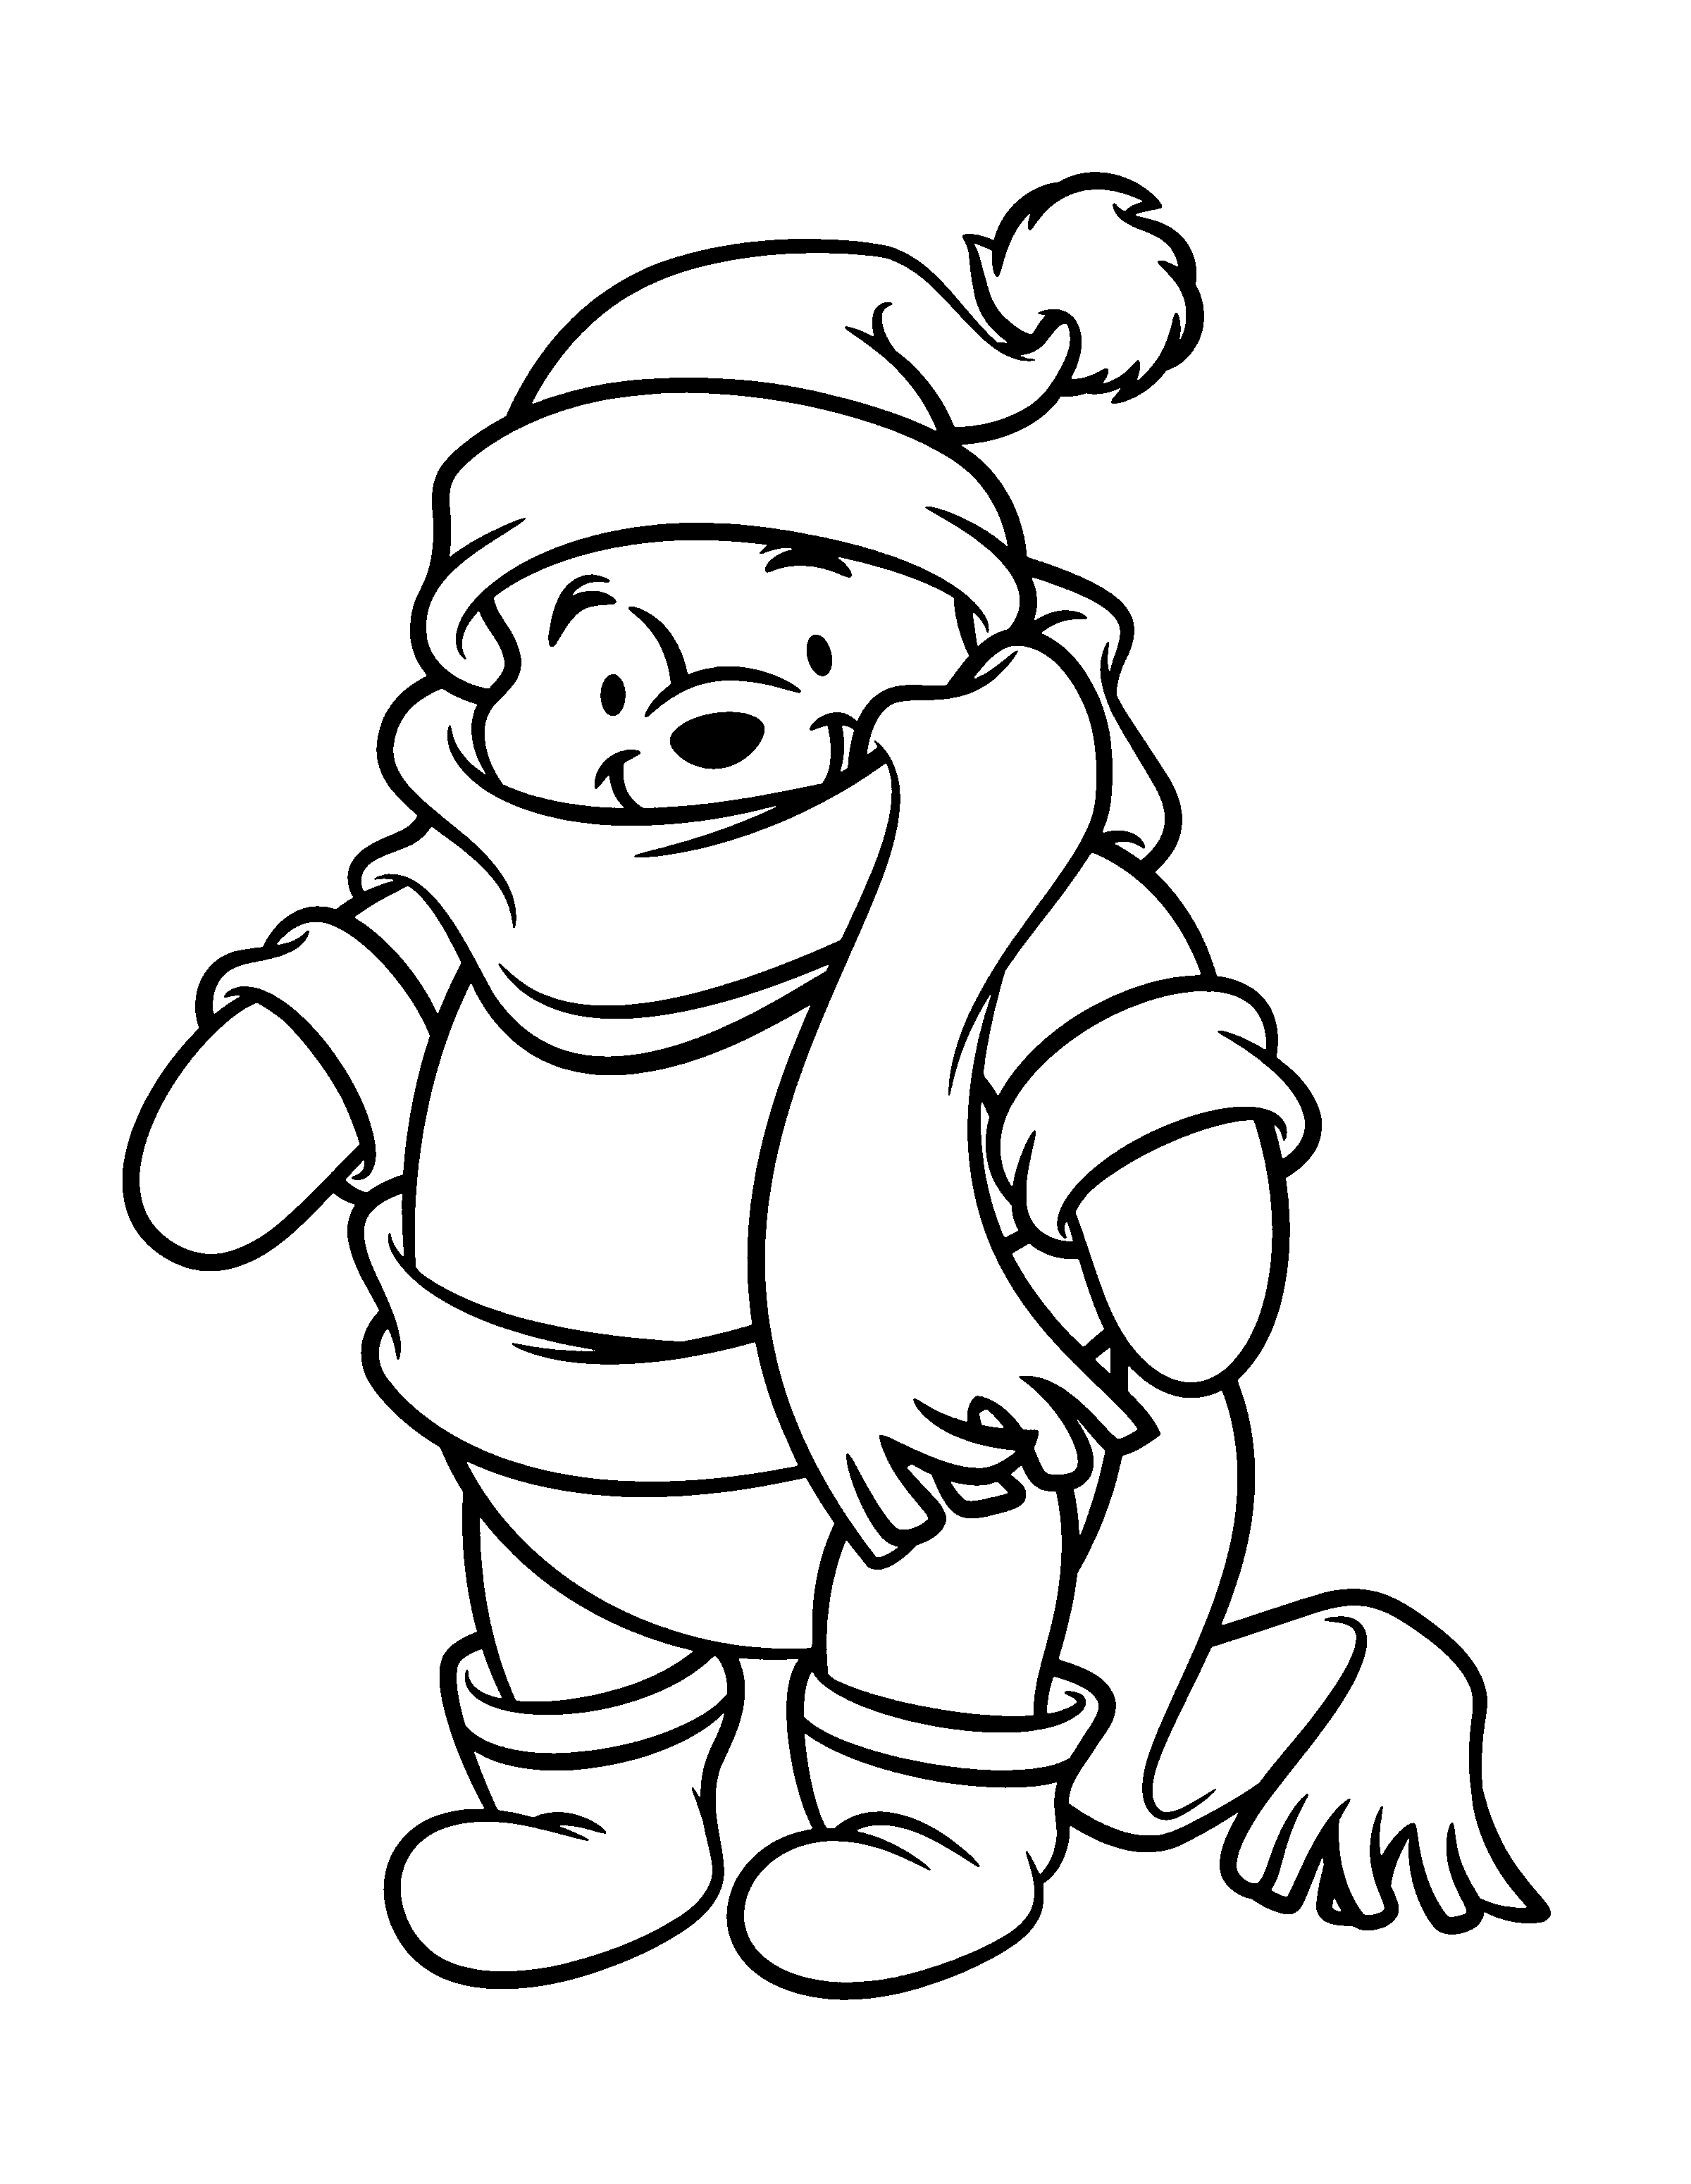 Pooh in Winter Clothes Coloring Page | Kids Coloring Page